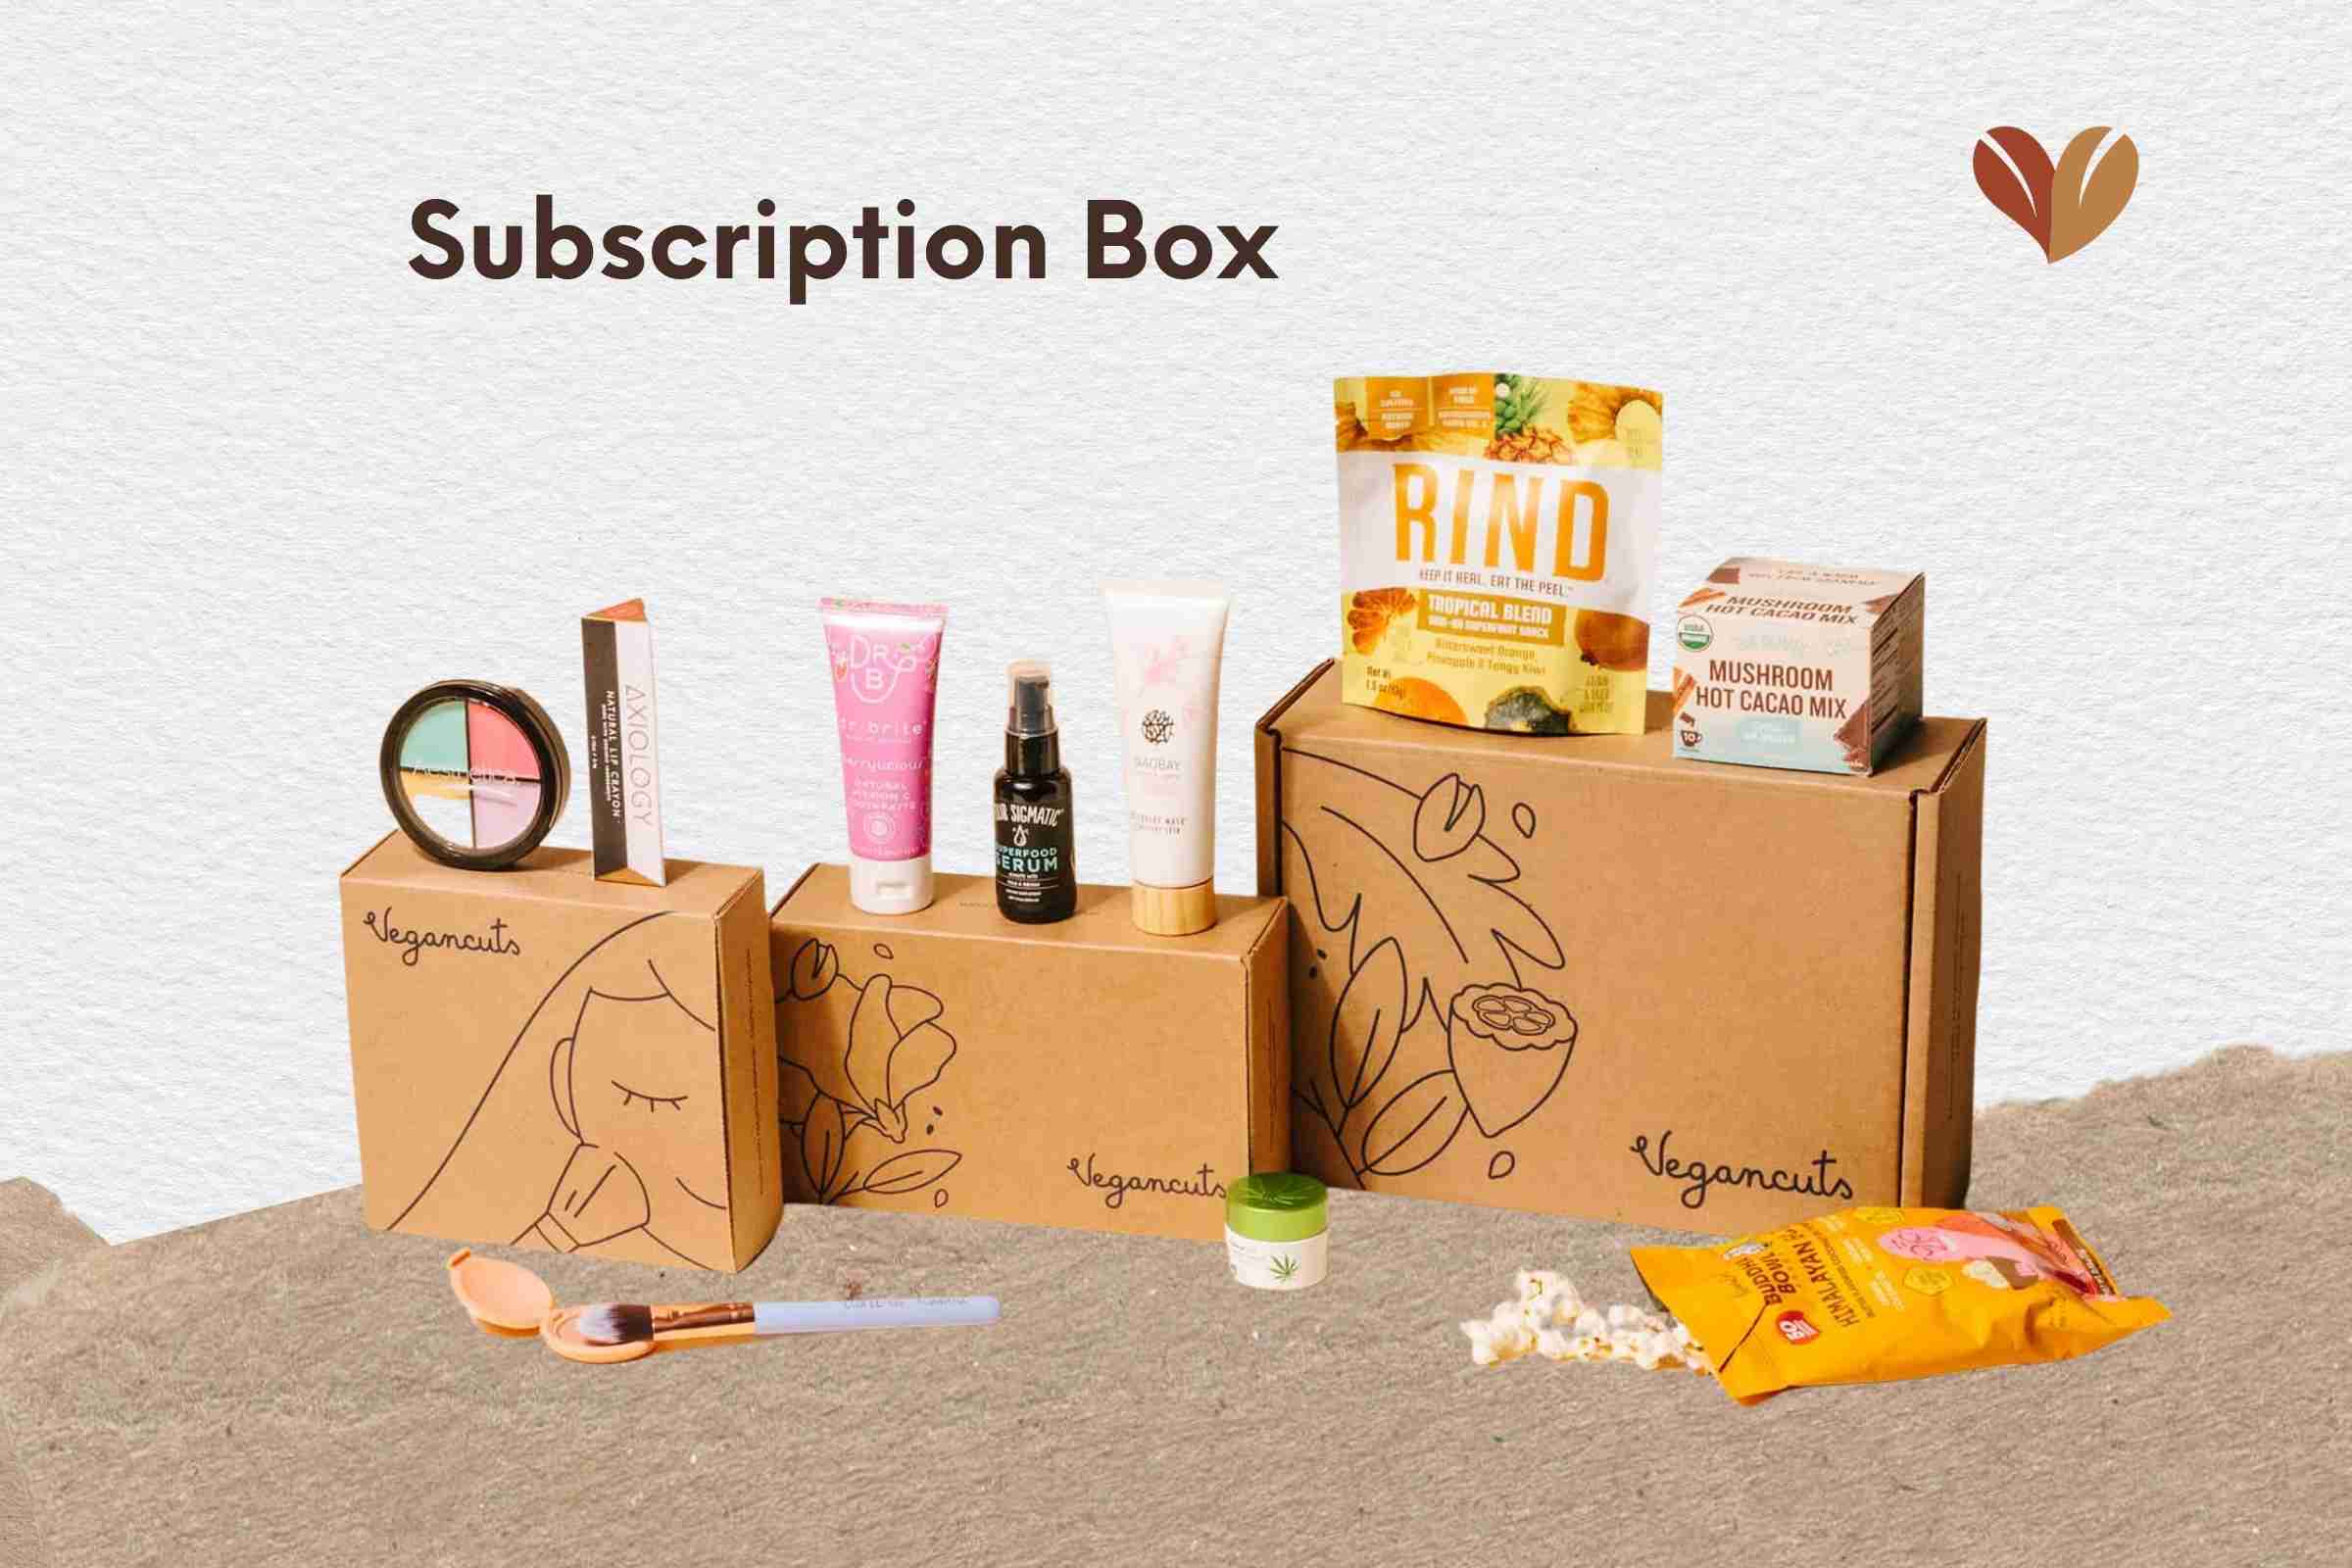 Anniversary Gifts for her - Surprise her with a subscription box that caters to her hobbies or interests.